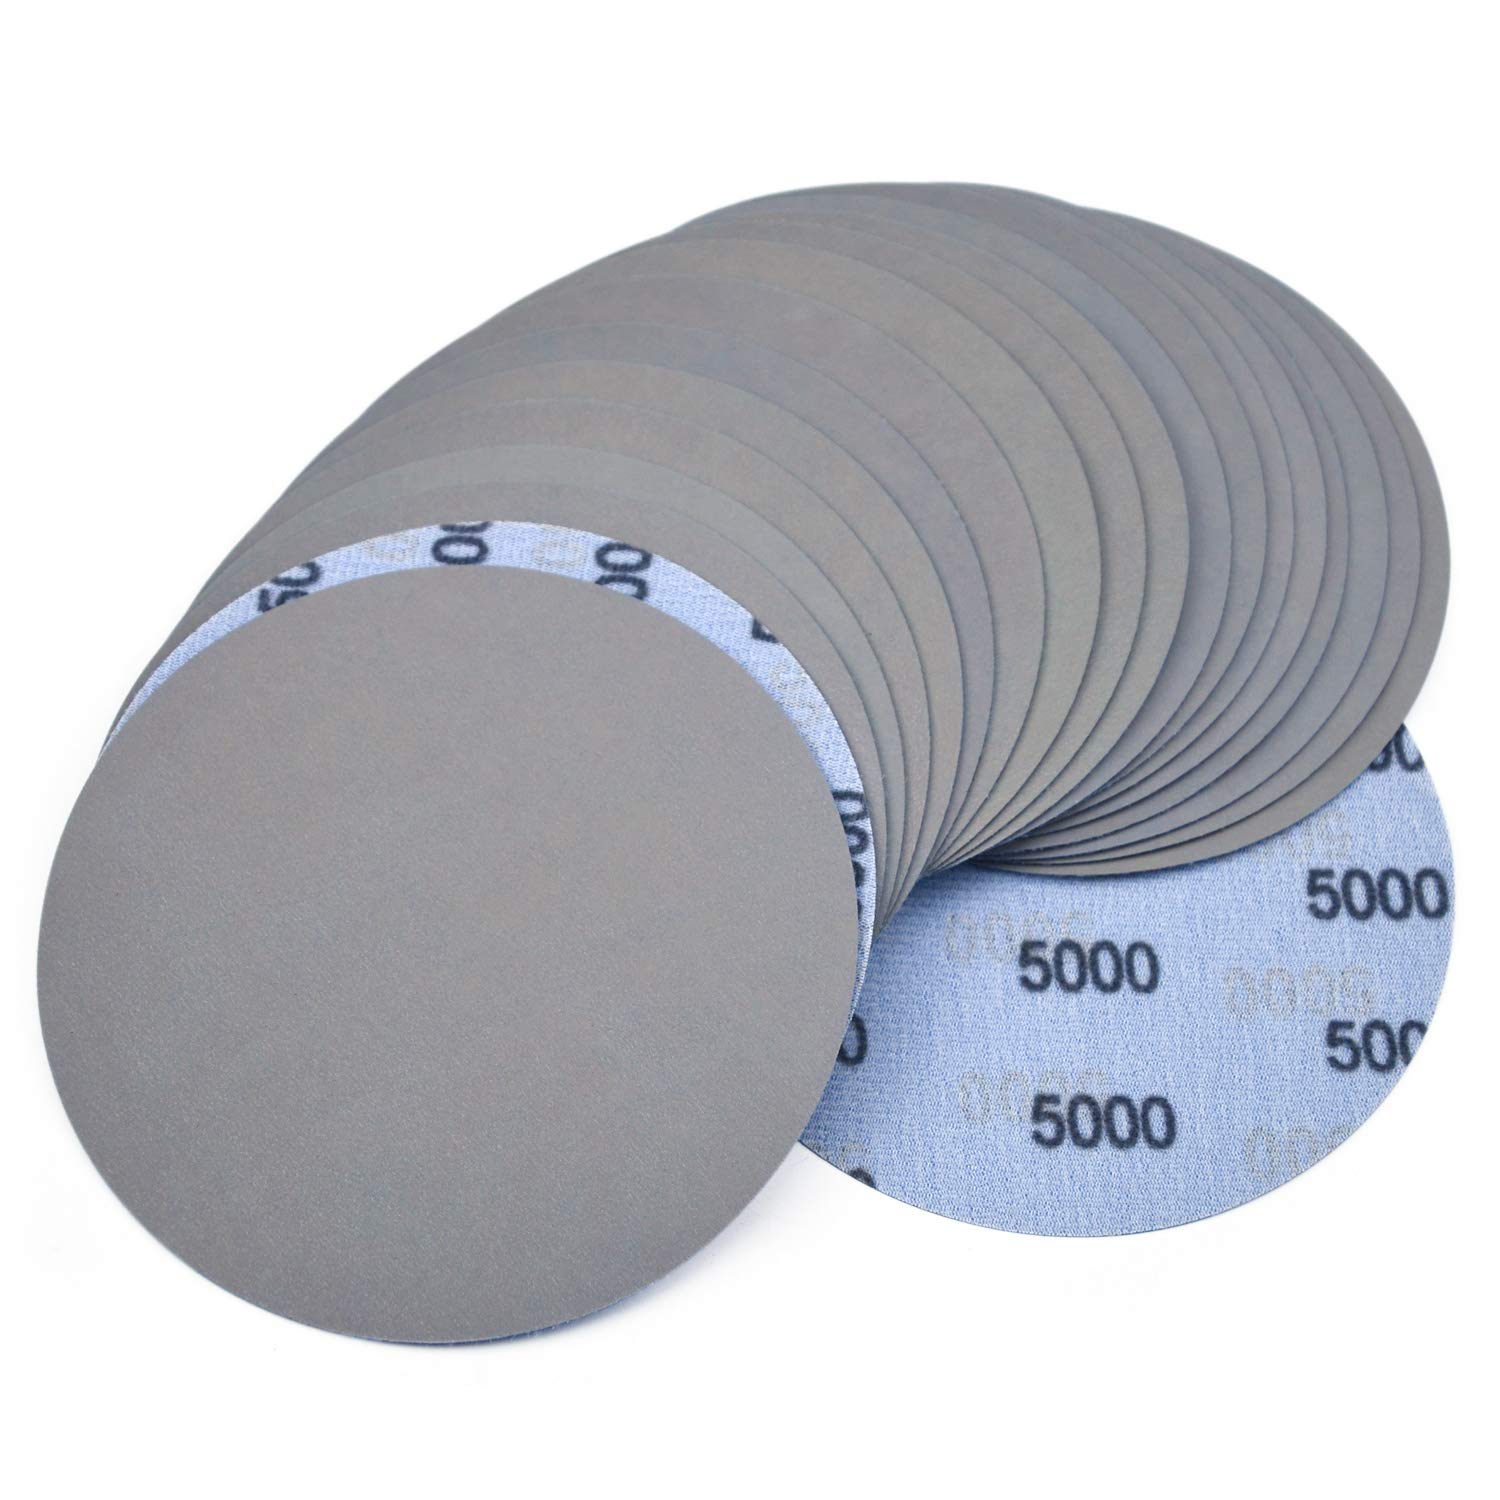 What Is 5000 Grit Sandpaper Used For